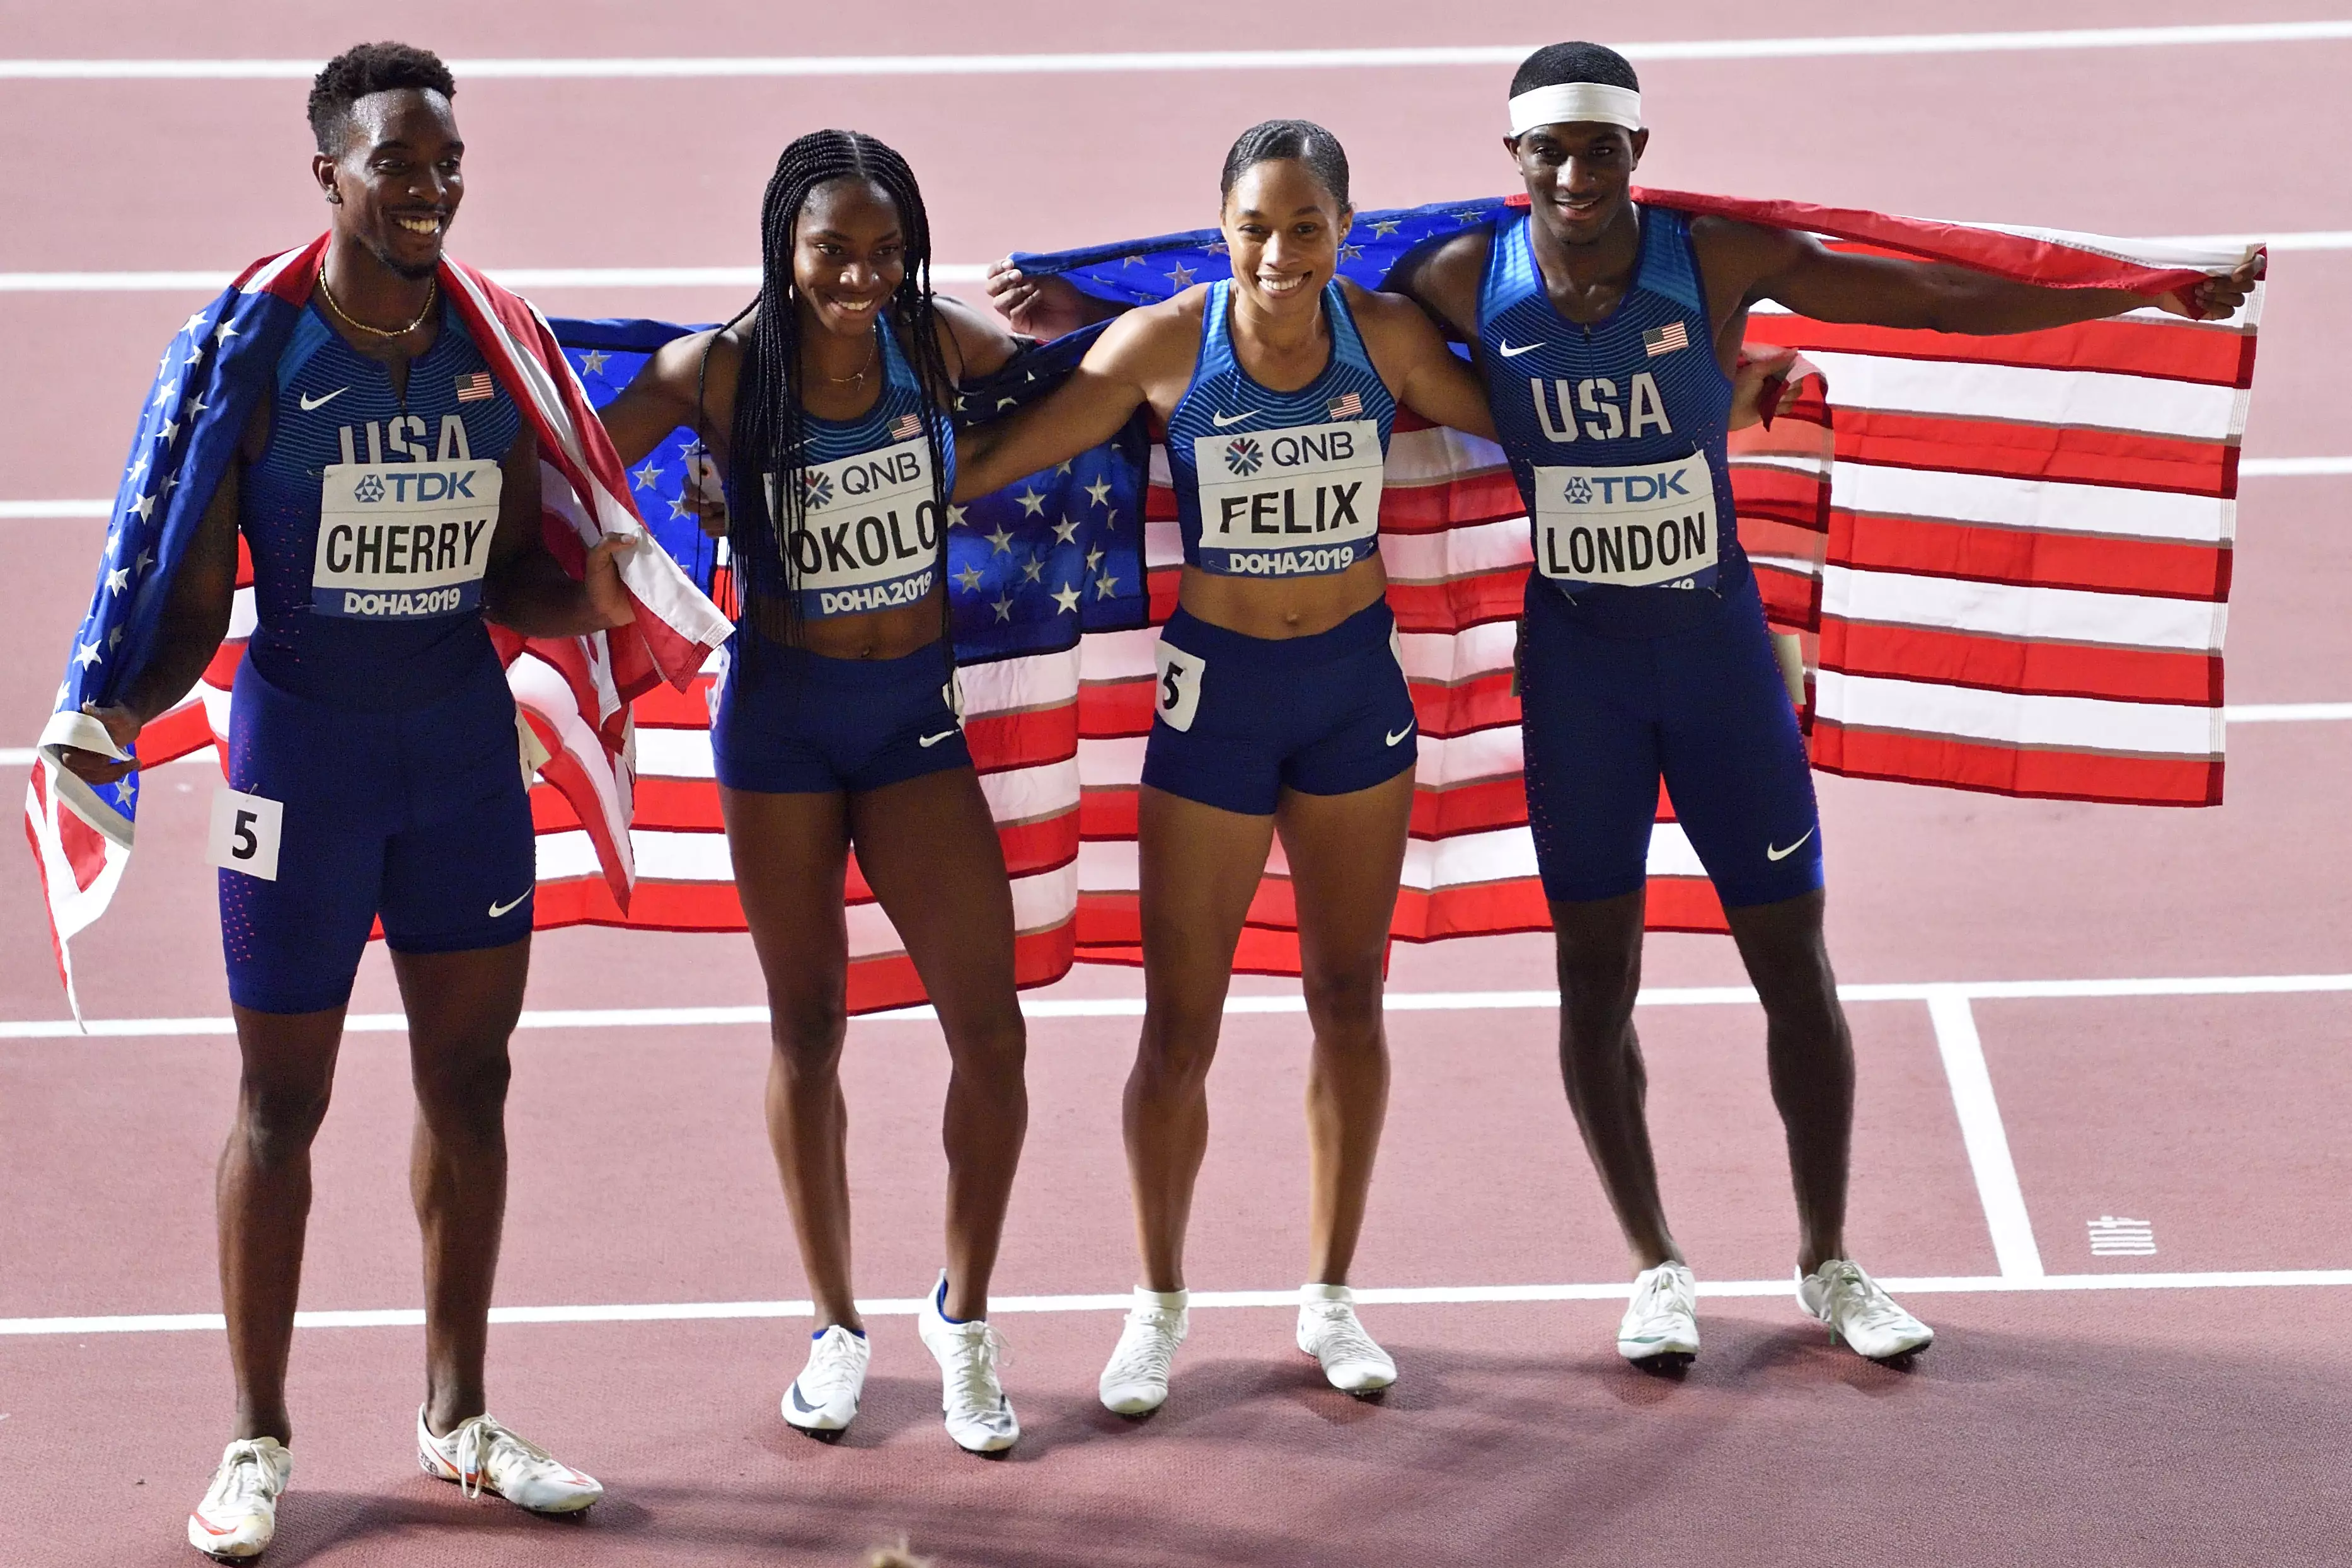 The USA team win gold in first ever mixed relay, giving Felix he 12th gold.